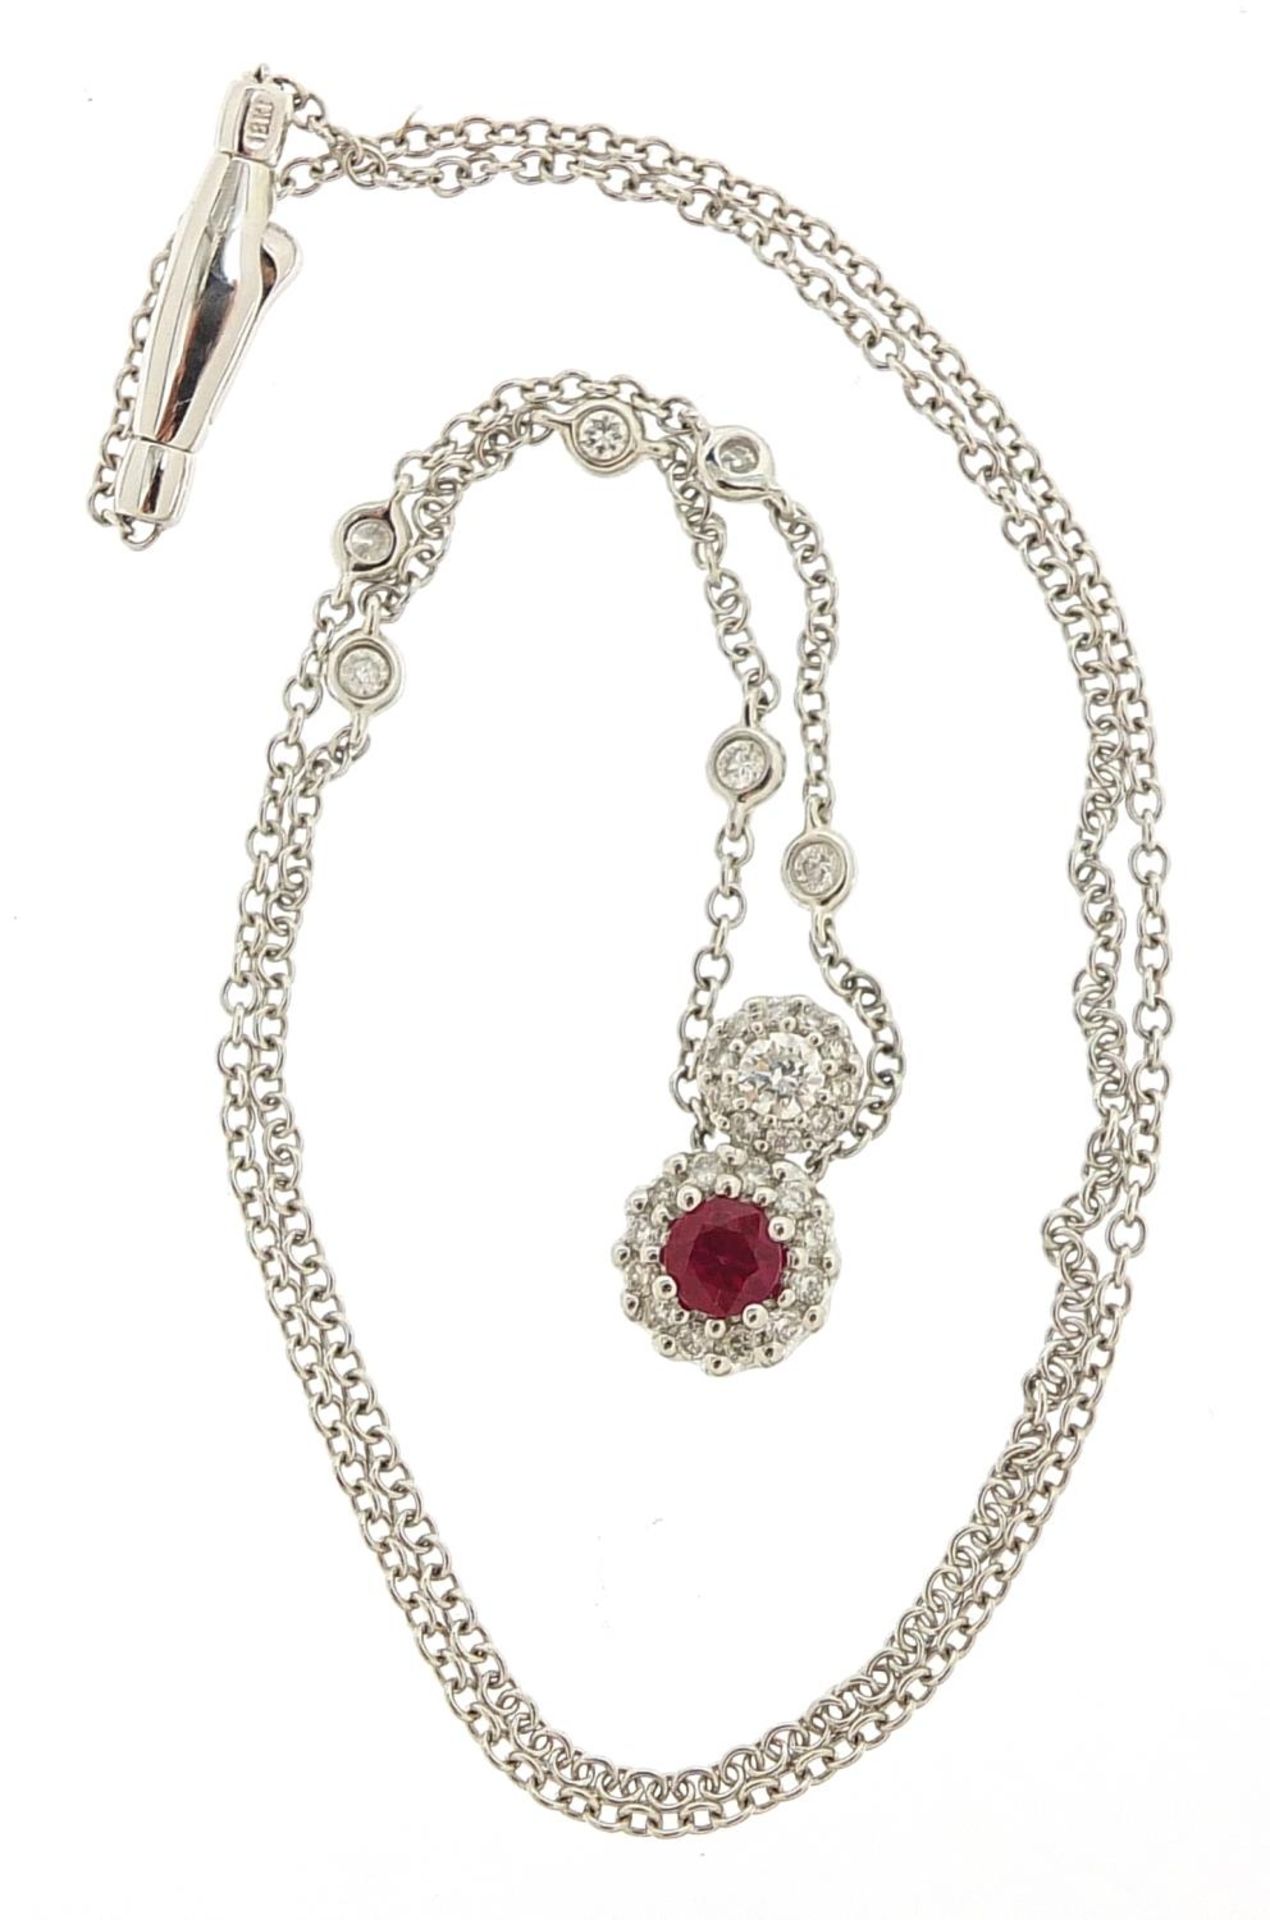 18ct white gold ruby and diamond necklace, stamped D 0.47 R 0.33, 40cm in length, 5.6g - Image 2 of 5